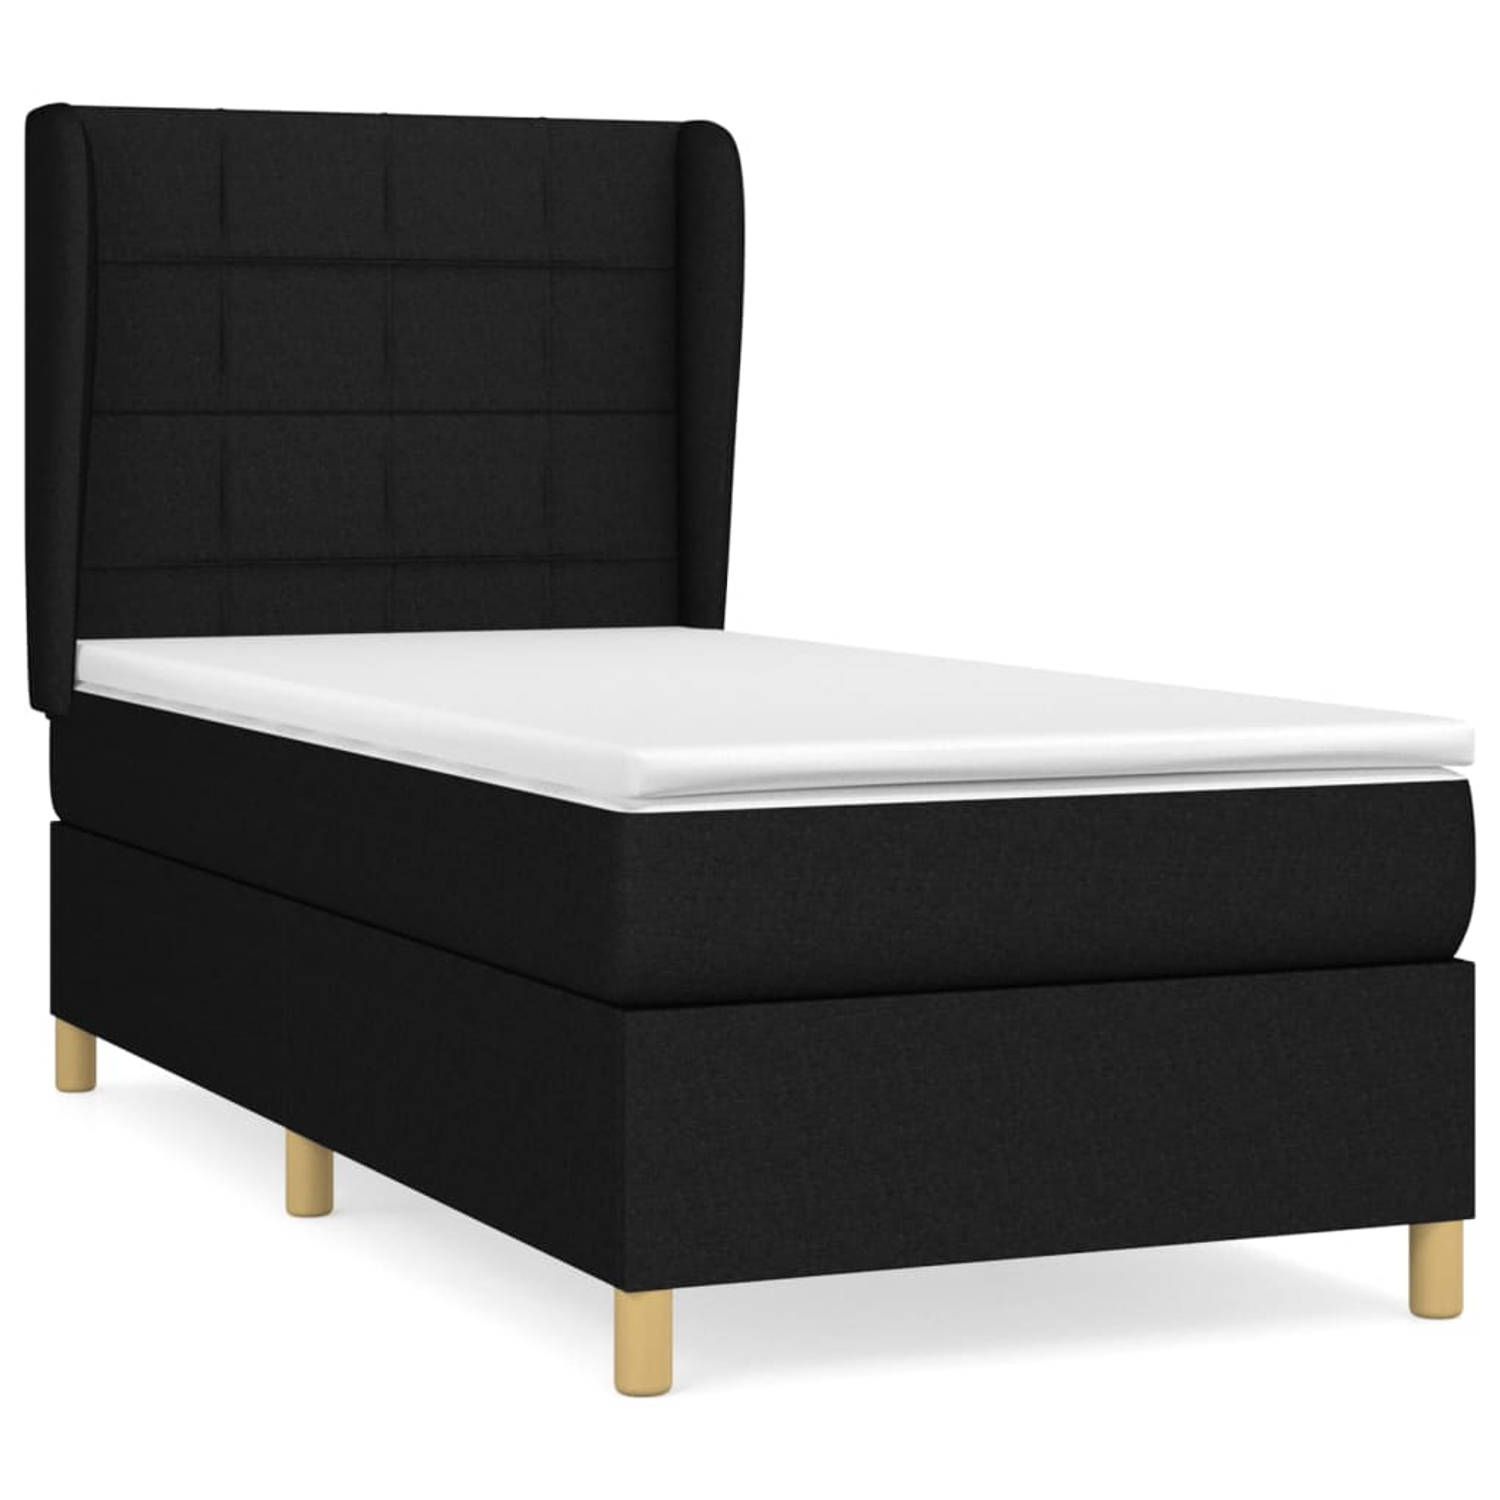 The Living Store Boxspringbed - Comfort - Bed - 193 x 93 x 118/128 cm - Zwart